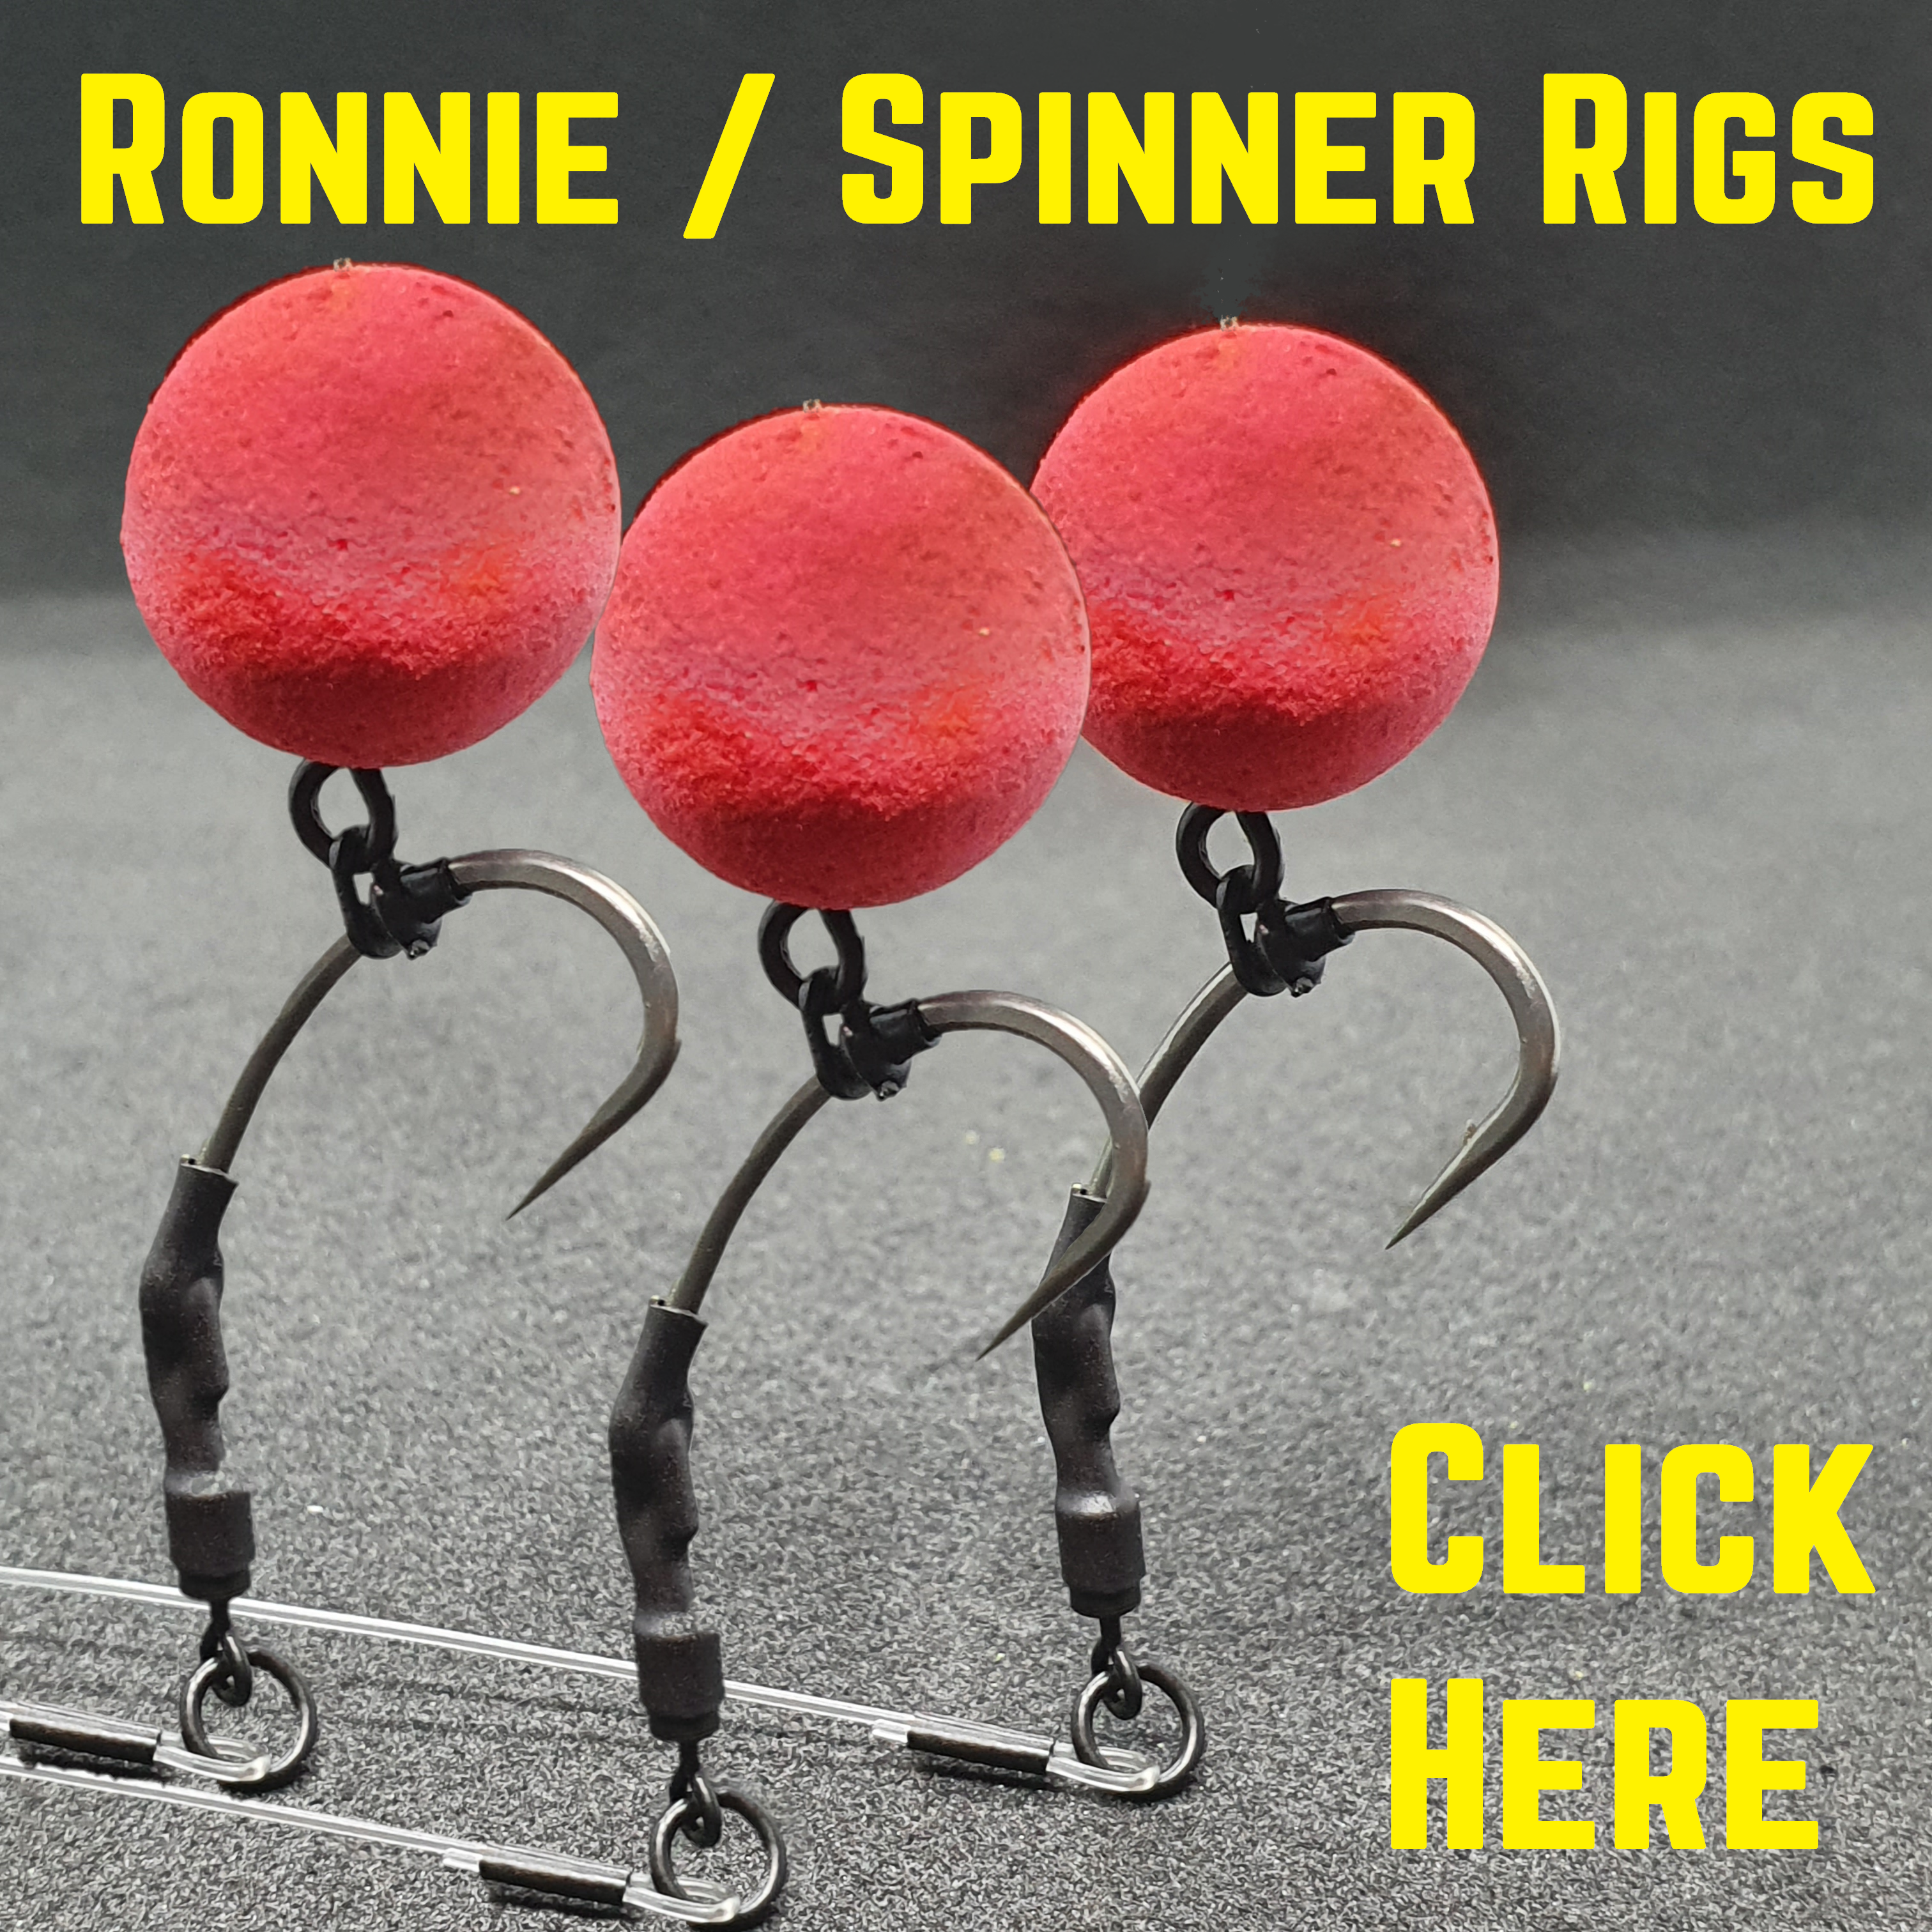 Please take a look at our other Ronnie / Spinner Rig listings